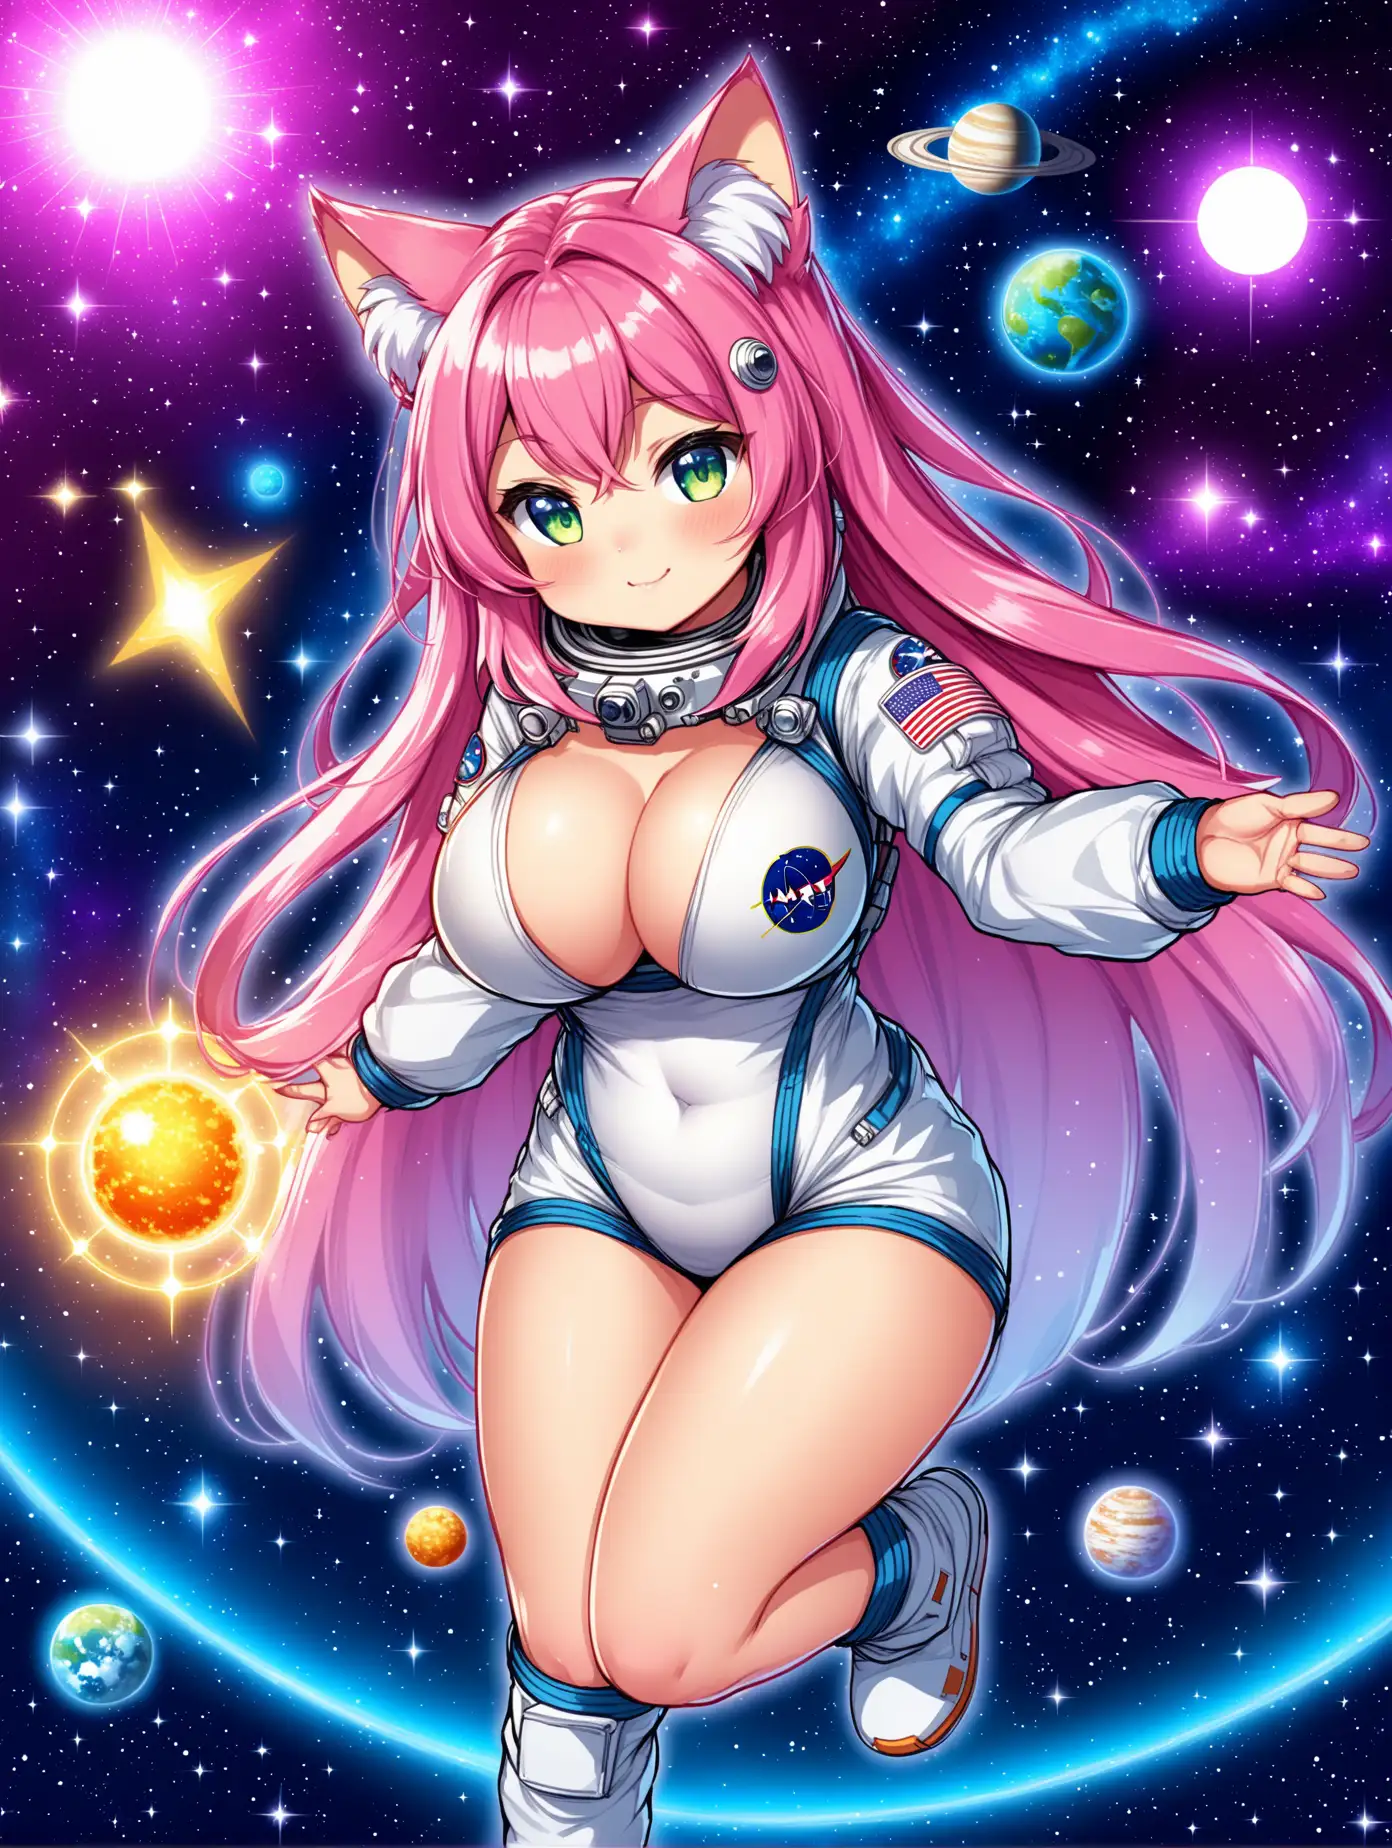 Cosmic Energy Surrounds Busty Catgirl Astrologer in AstronautThemed Setting